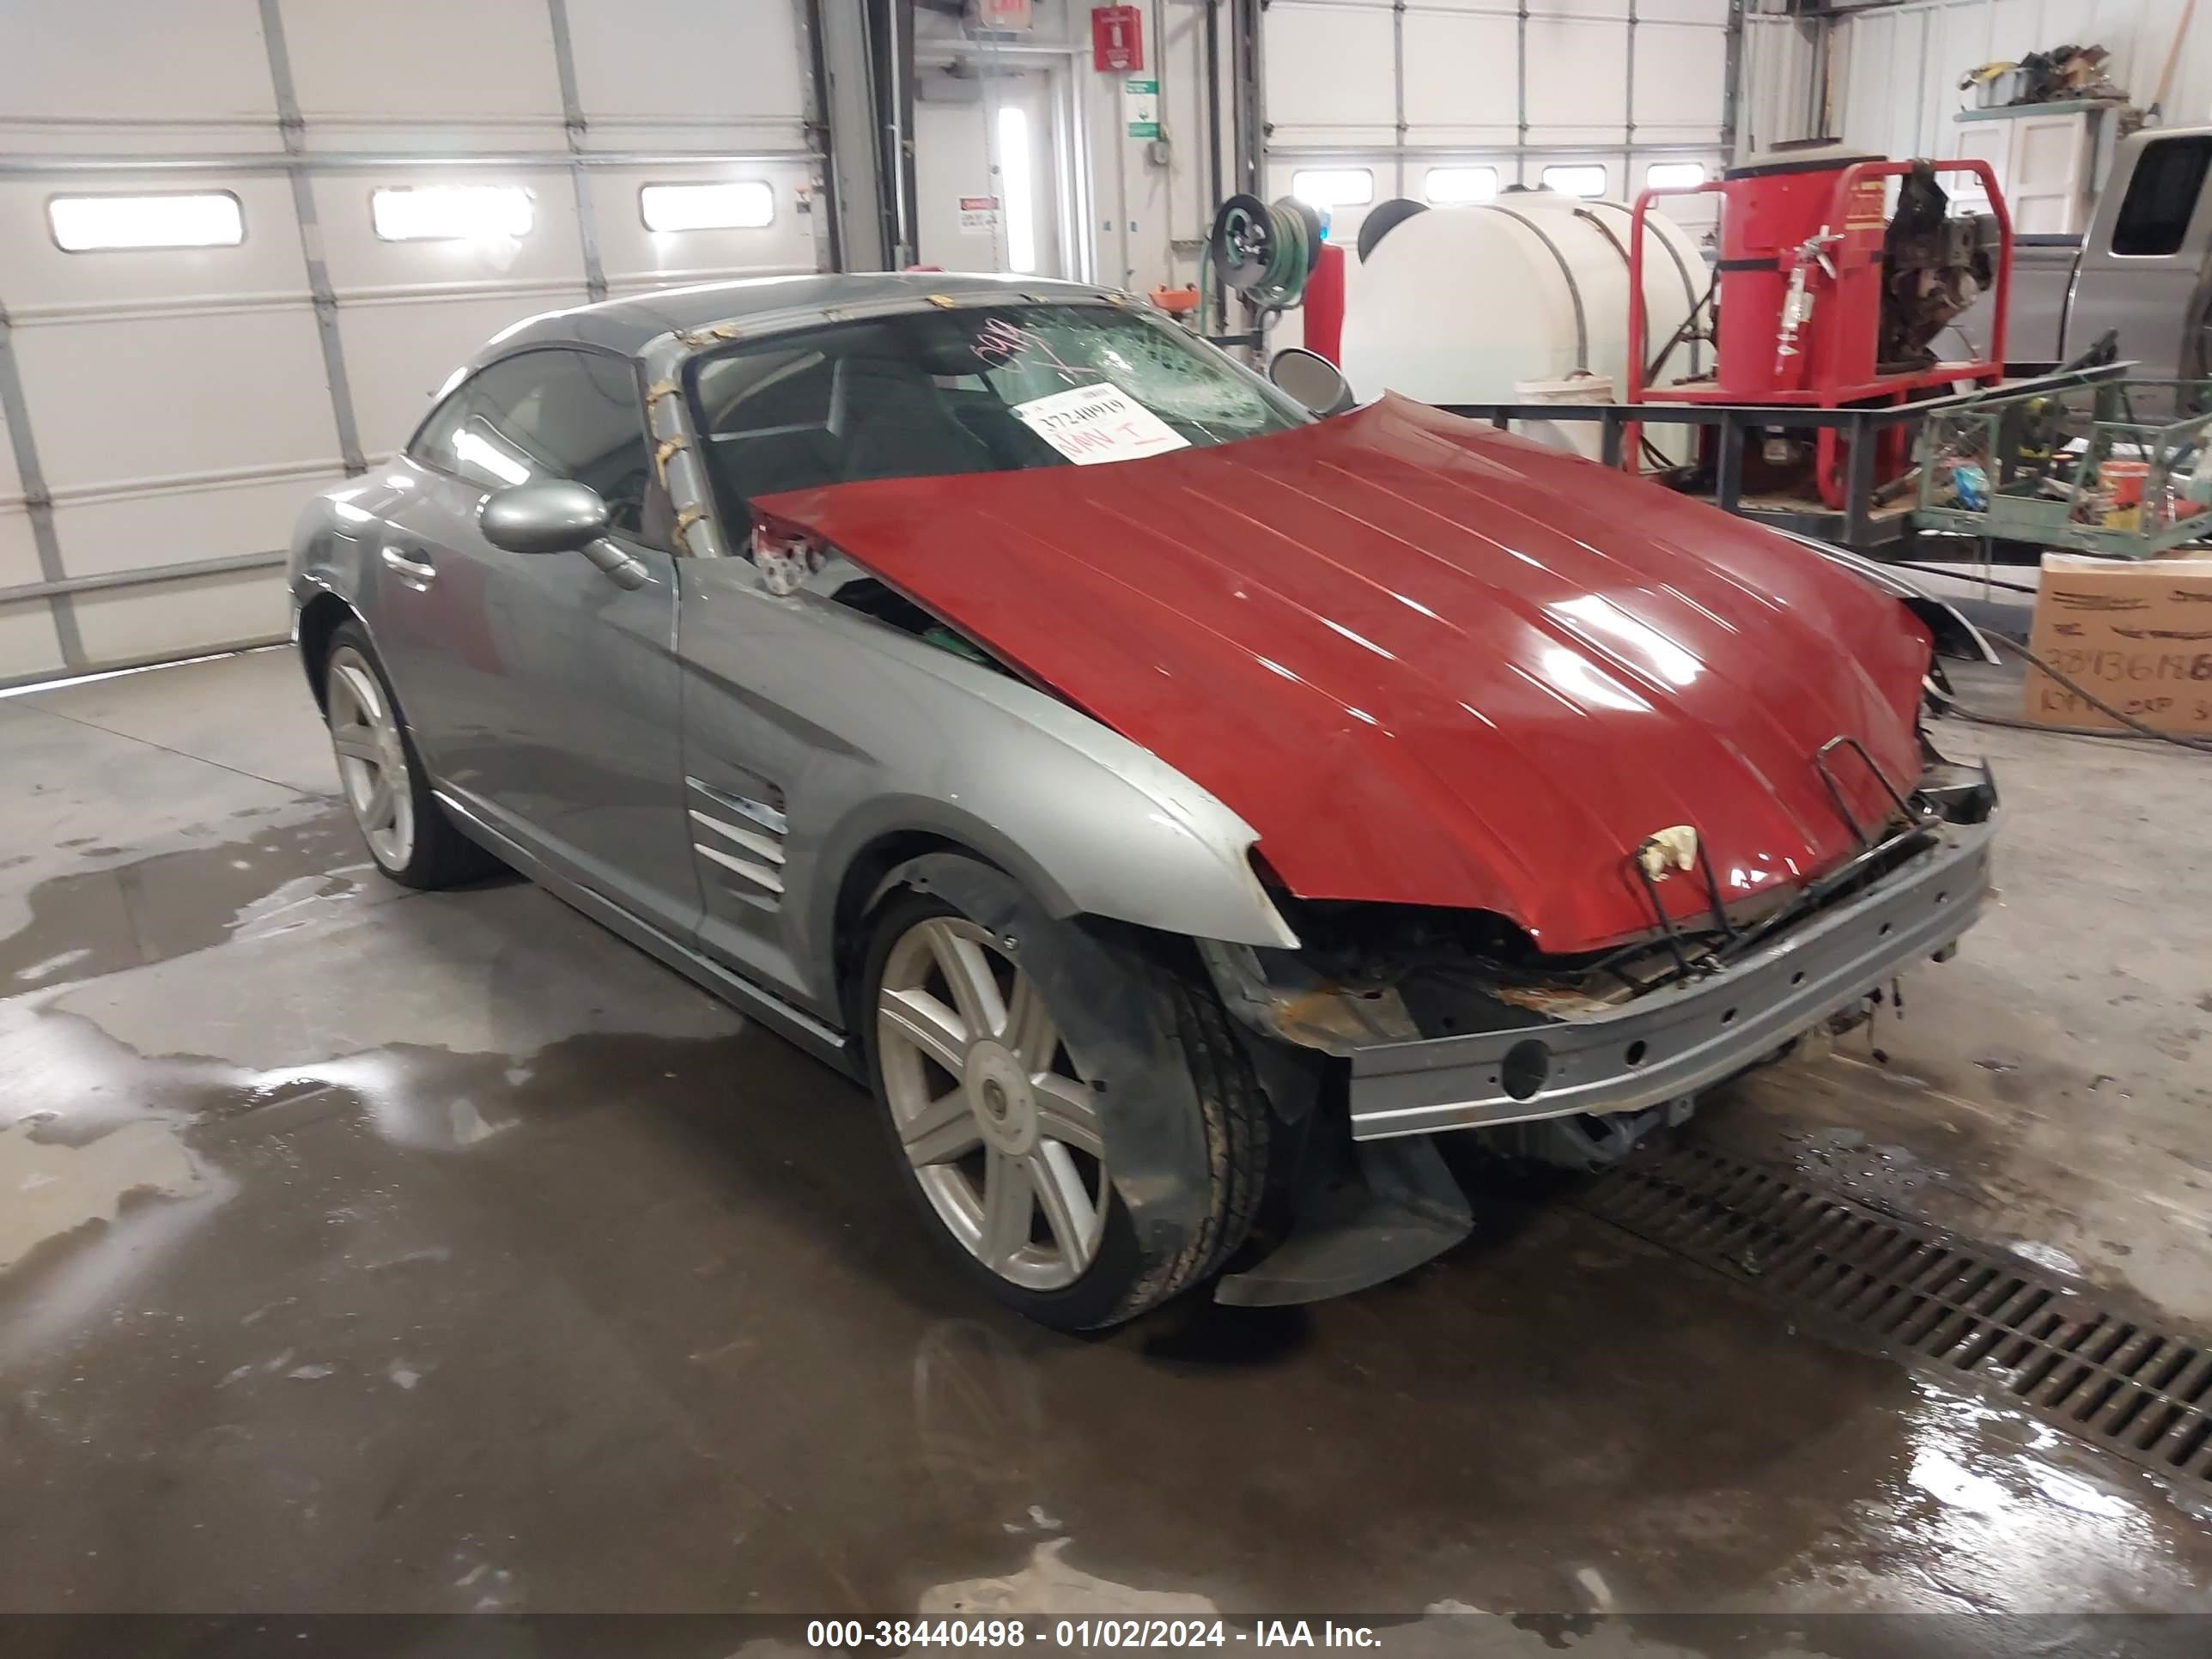 vin: 1C3AN69L64X014783 1C3AN69L64X014783 2004 chrysler crossfire 3200 for Sale in 65803, 1155 N Eldon Ave, Springfield, Mississippi, USA